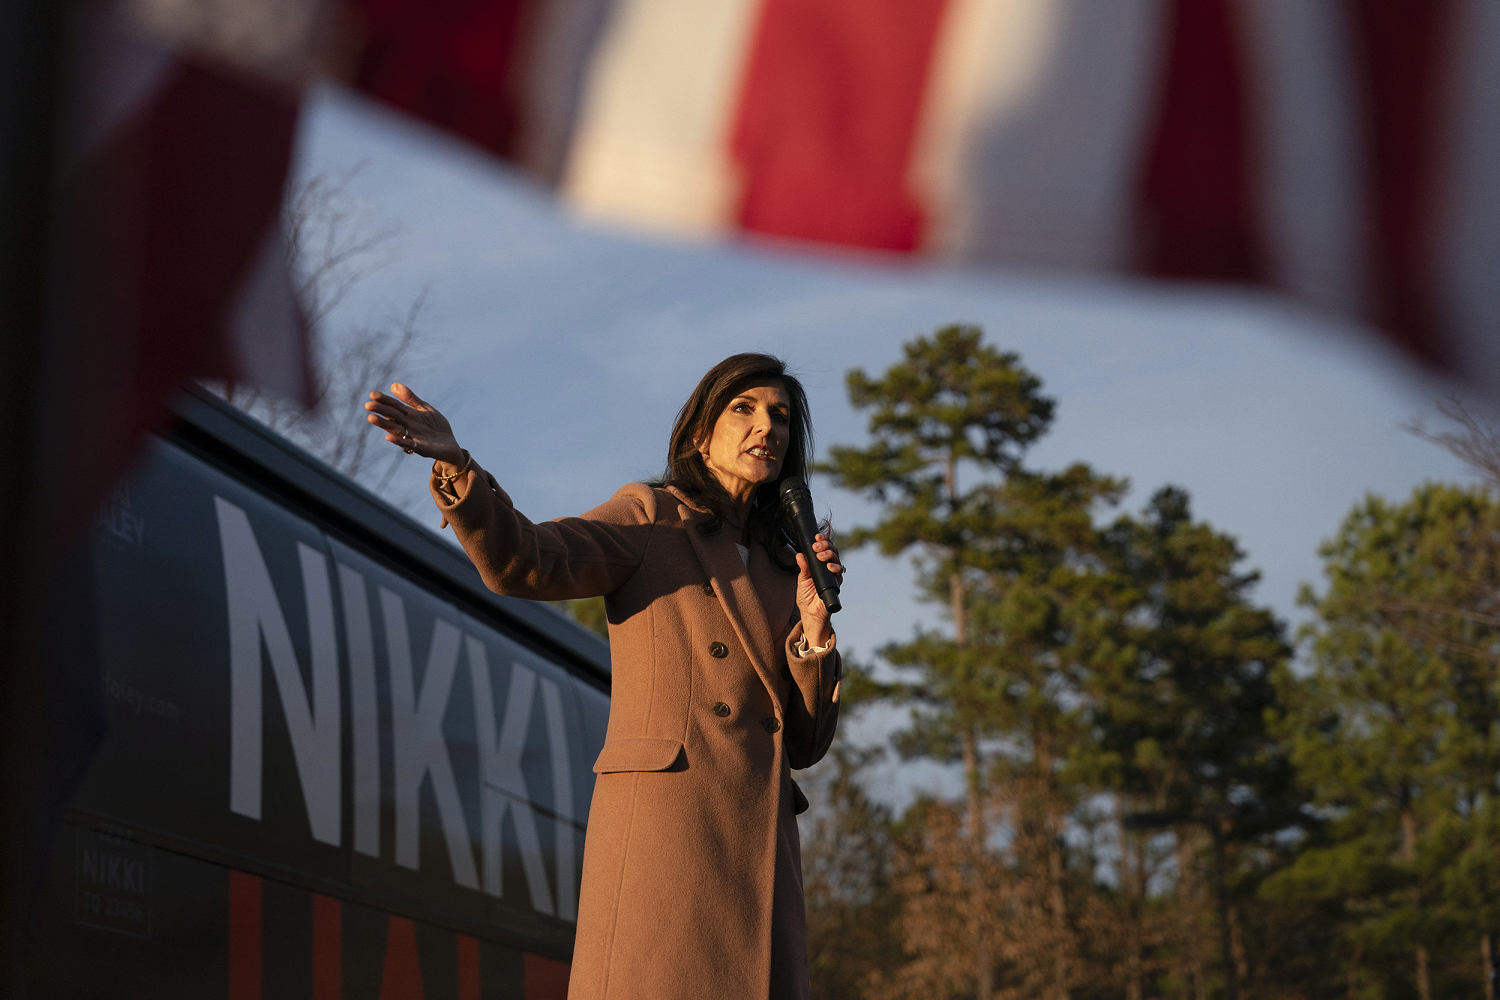 'I refuse to quit': Nikki Haley vows to stay in the presidential race after South Carolina